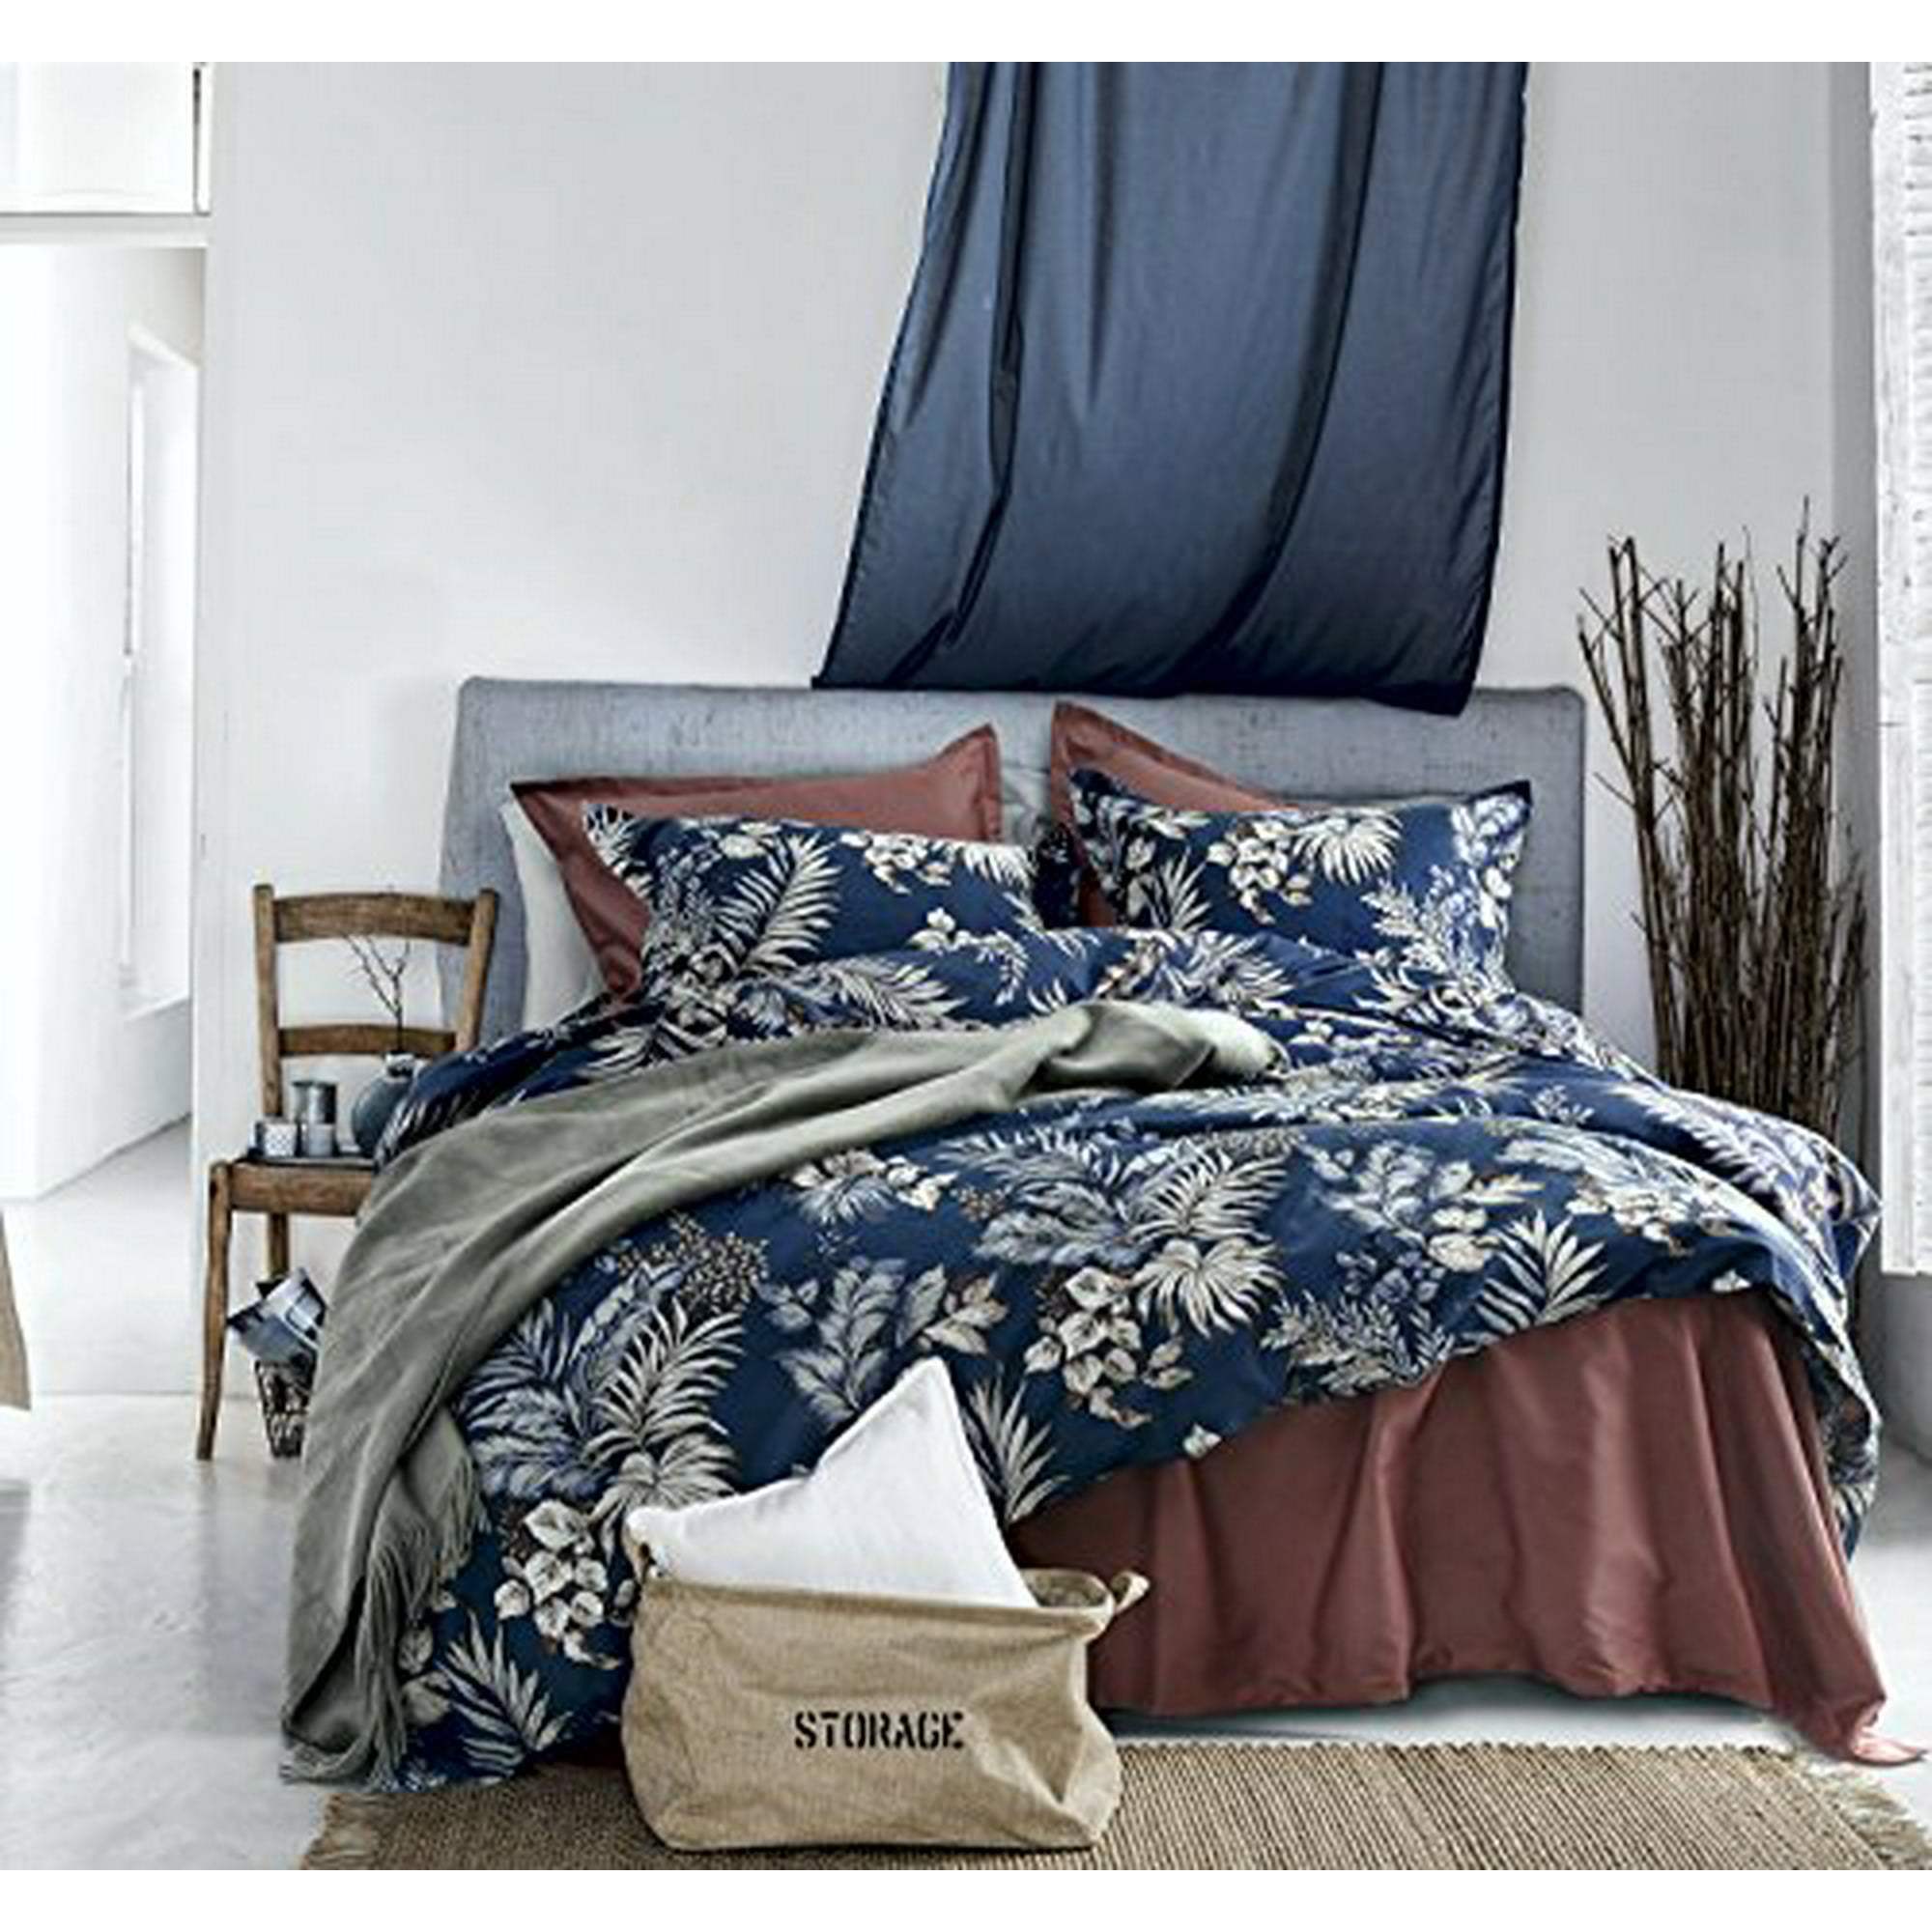 BEAUTIFUL MODERN CHIC BLUE NAVY BEIGE TAUPE FLORAL LEAF COMFORTER SET & PILLOWS